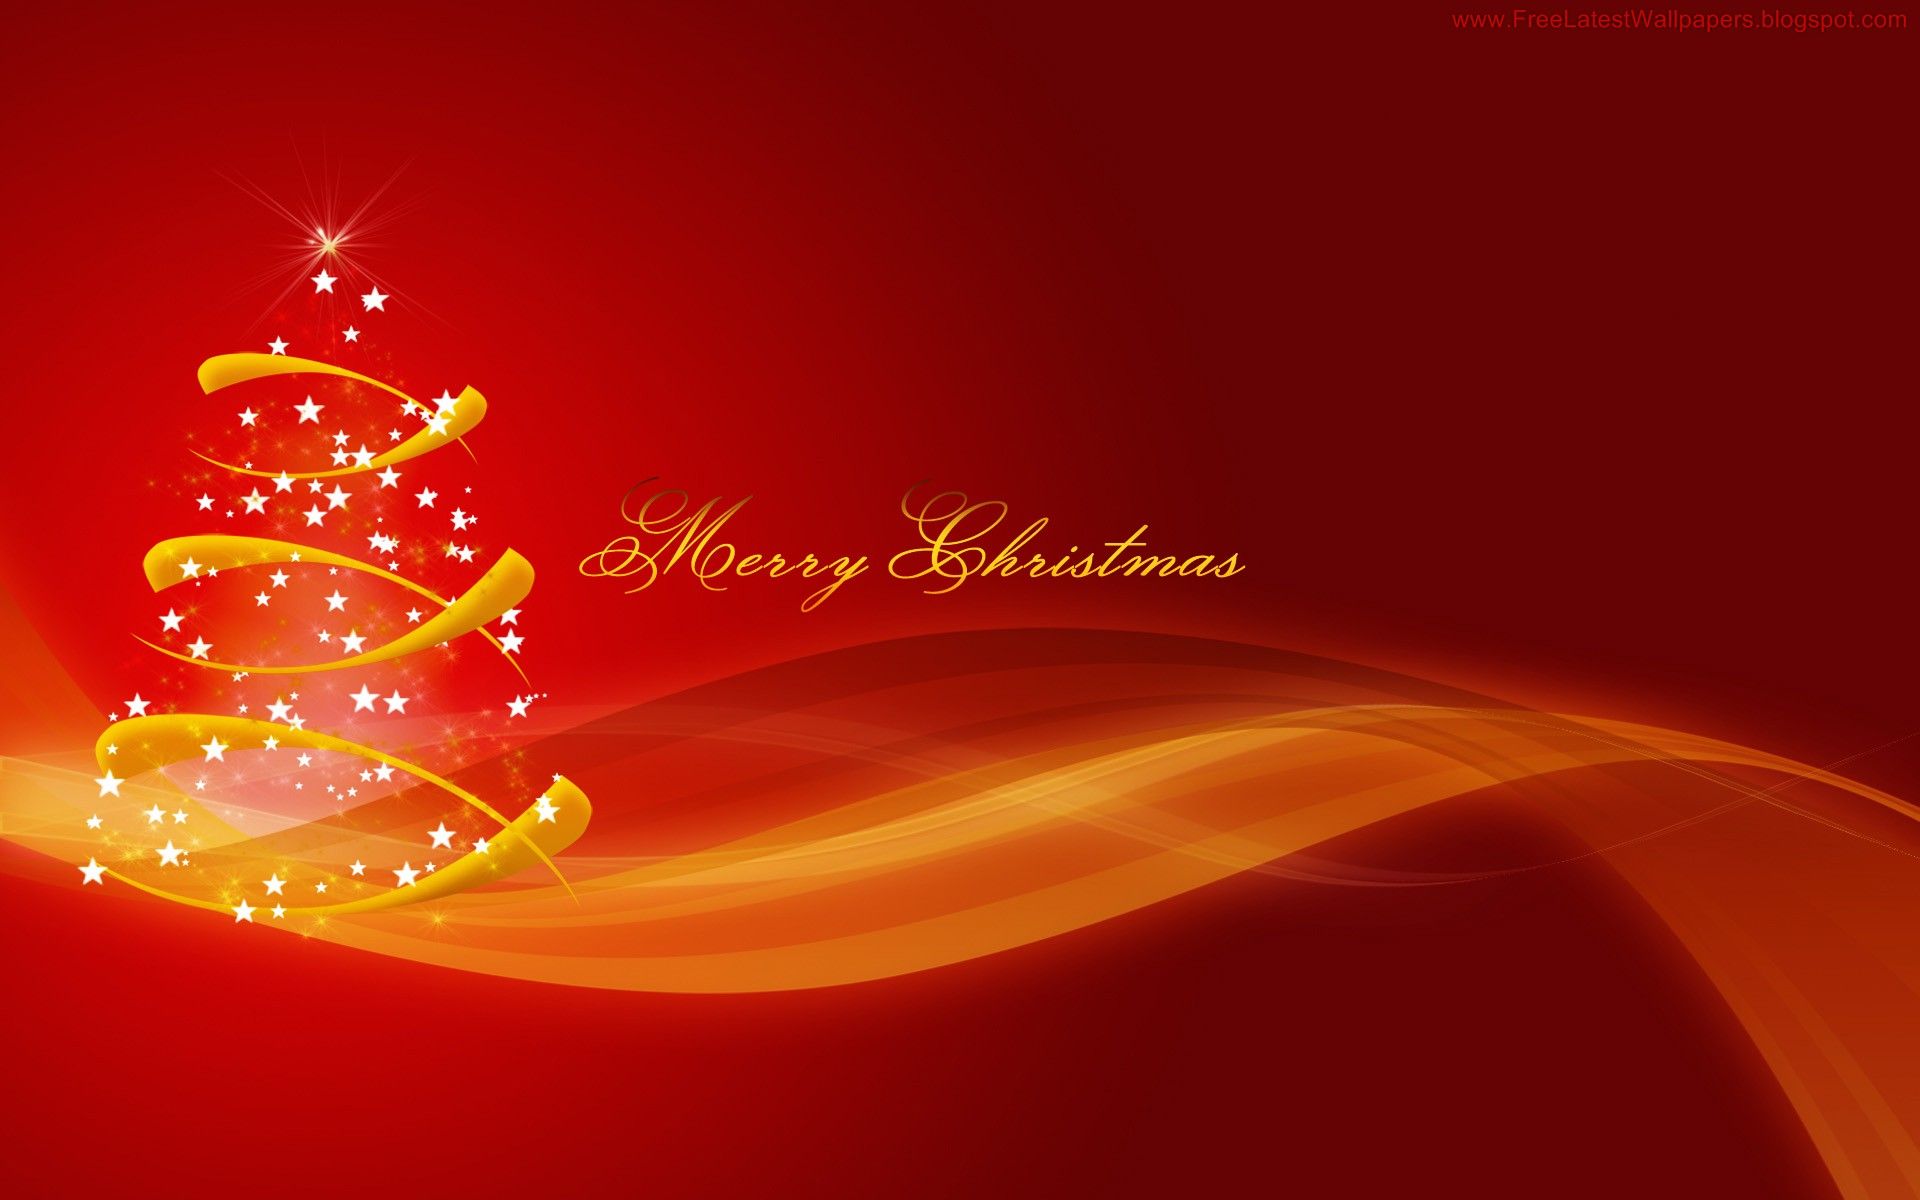 Christmas wallpaper hd - photos, images, pics, pictures |